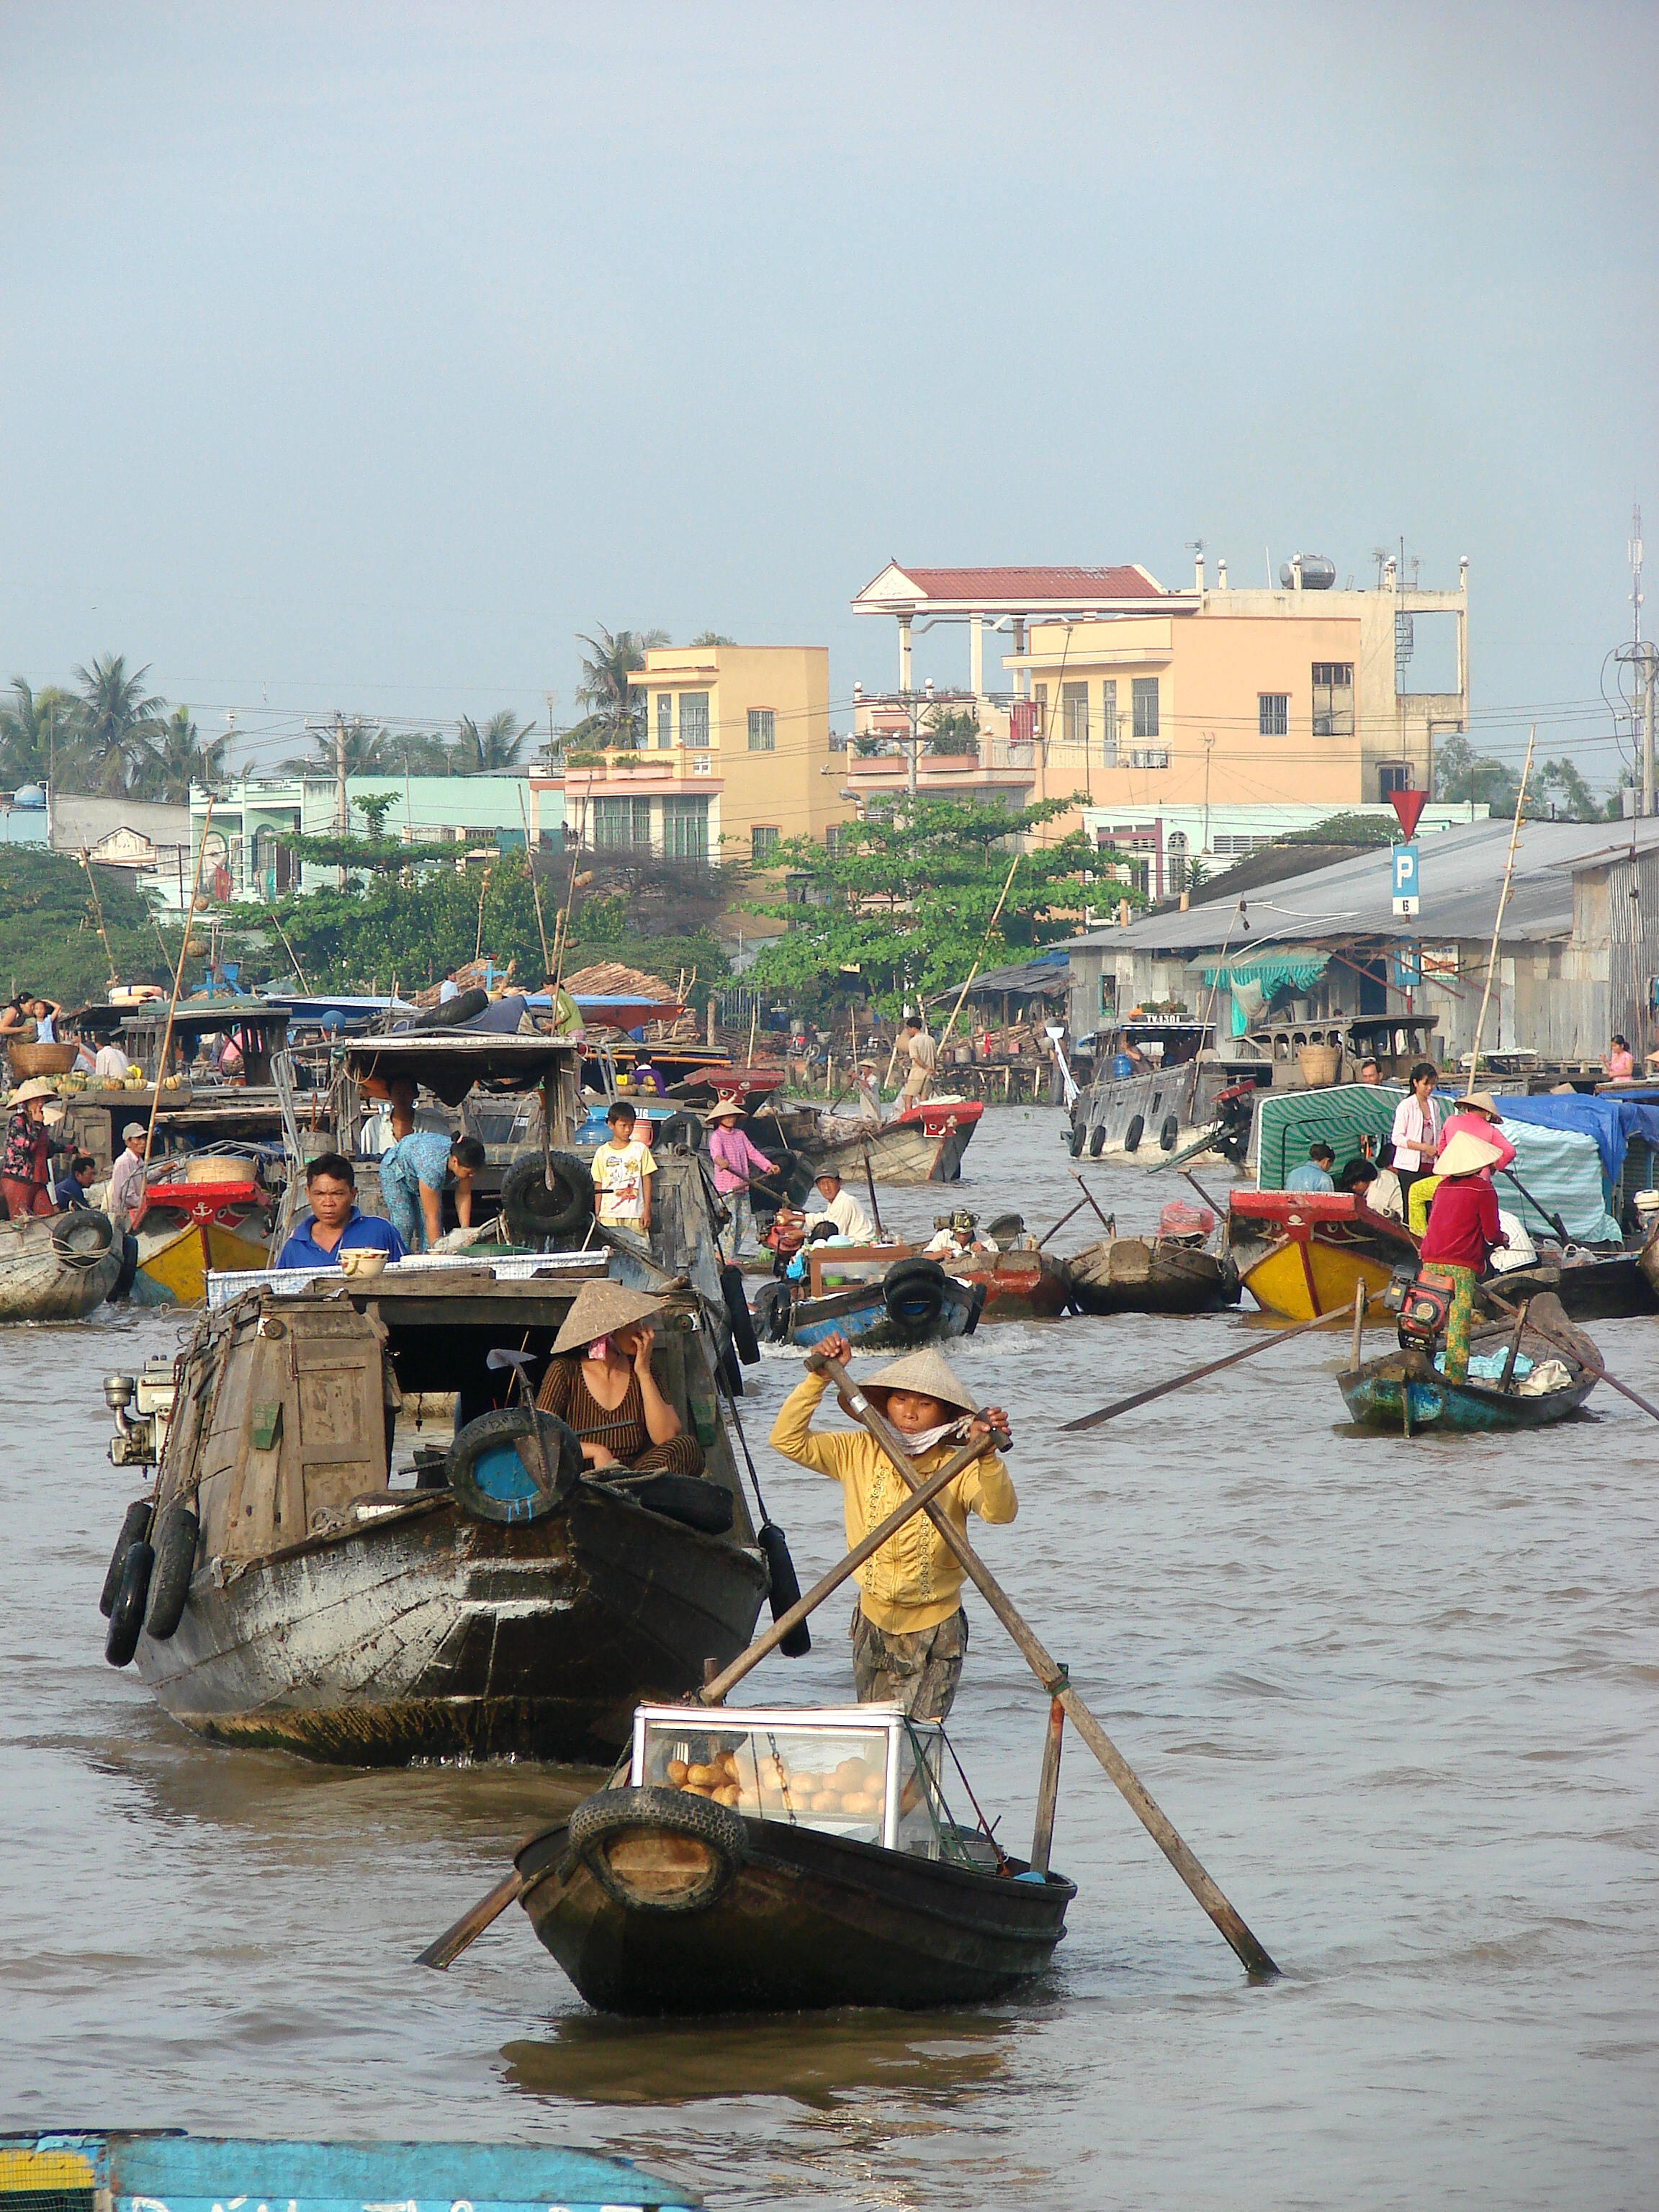 File:Floating Market - Can Tho - Vietnam.JPG - Wikimedia Commons